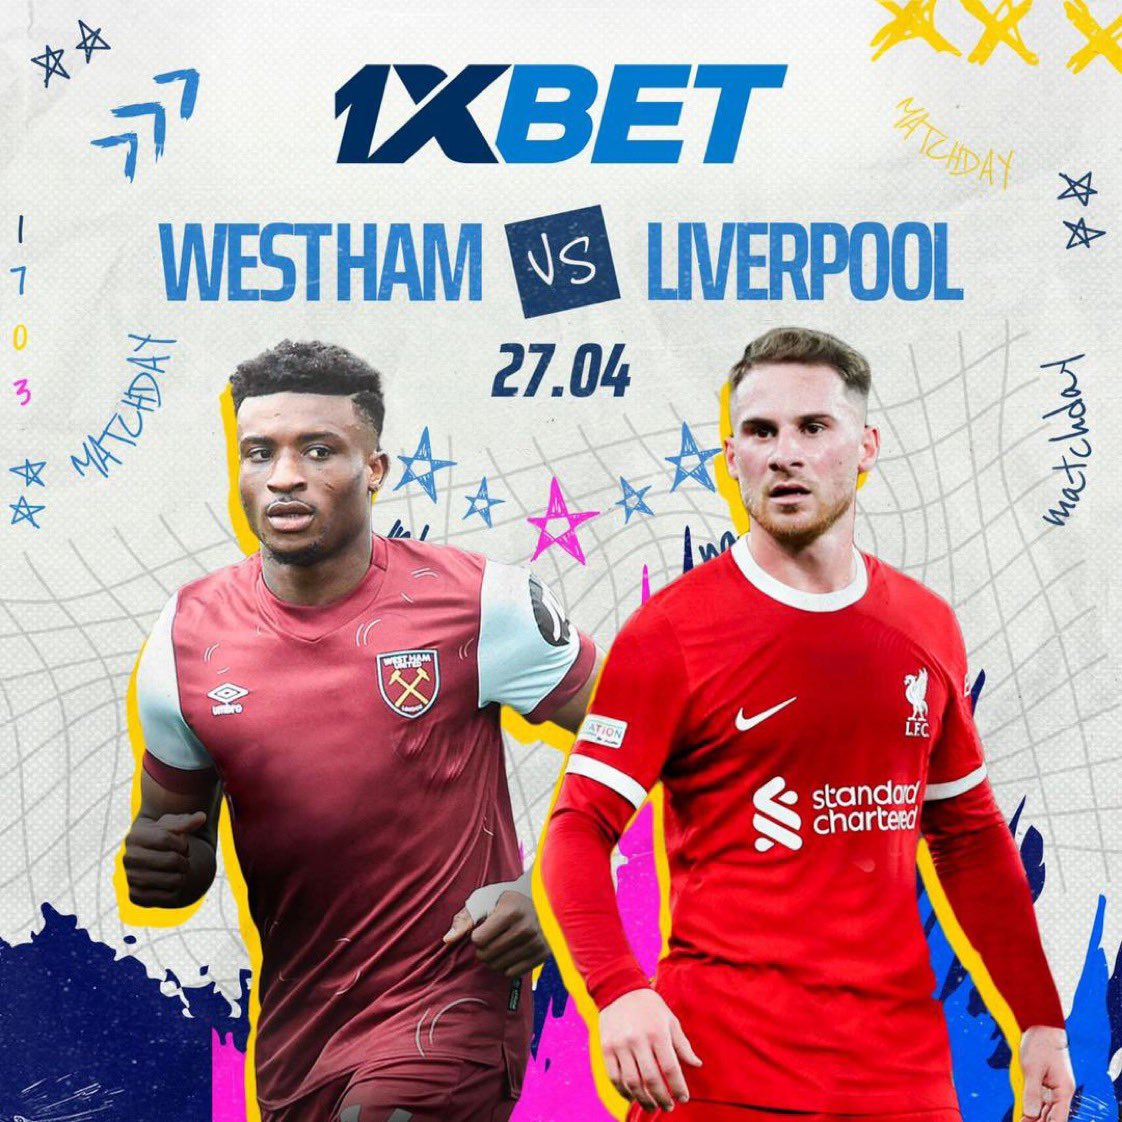 Westham vs Liverpool now, who is your money on??? Drop your correct predictions using my link on 1XBET: tinyurl.com/5h9x5z5x And make sure you use my promo code “Jhayhne” and get 200% bonus up to $150 on your first deposit 👏🏾